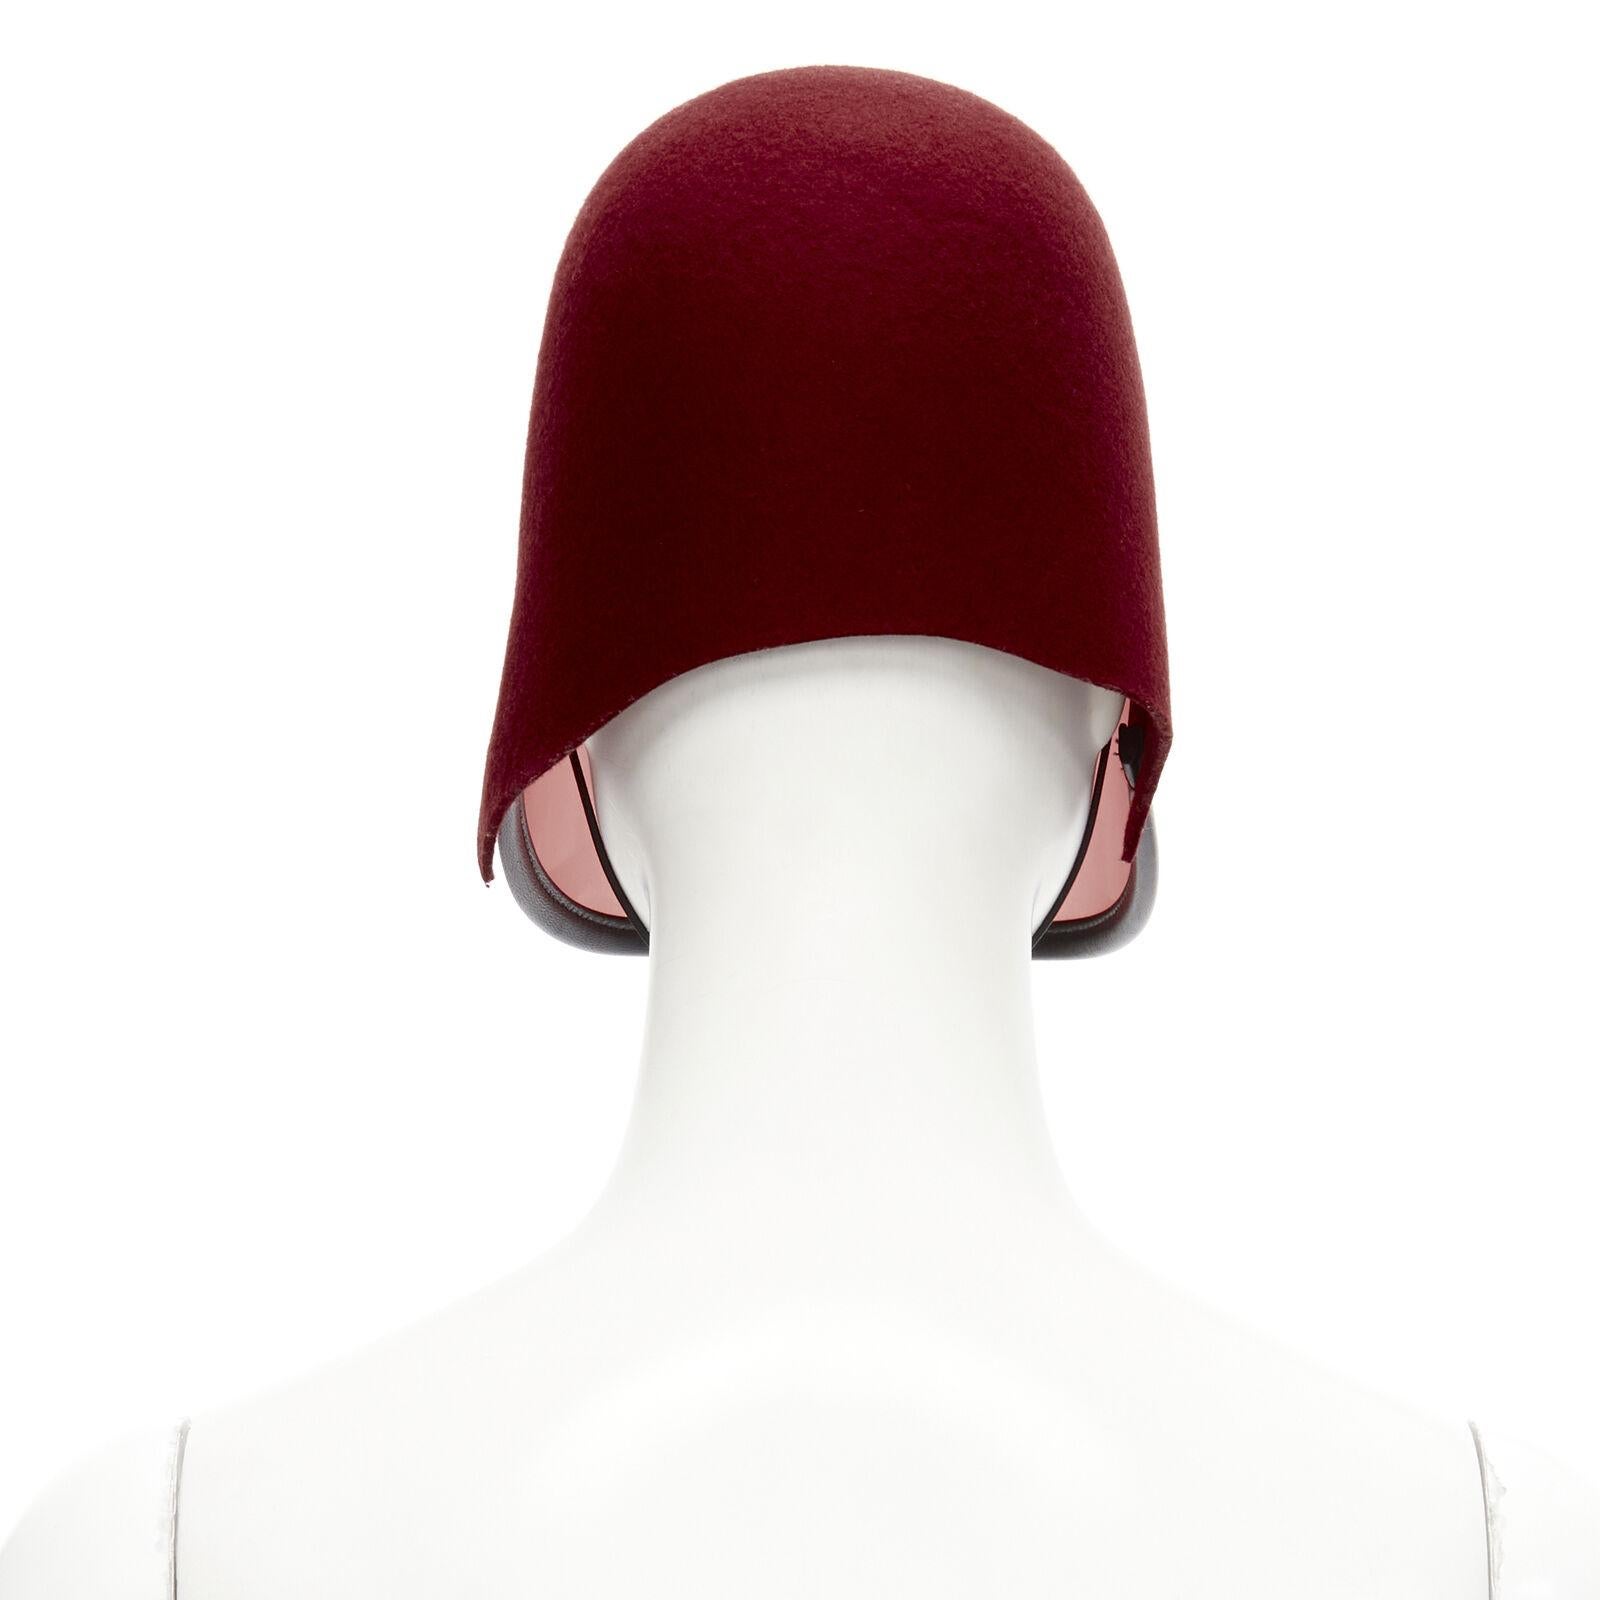 rare GUCCI Alessandro Michele red wool felt leather trim clear visor hat 1